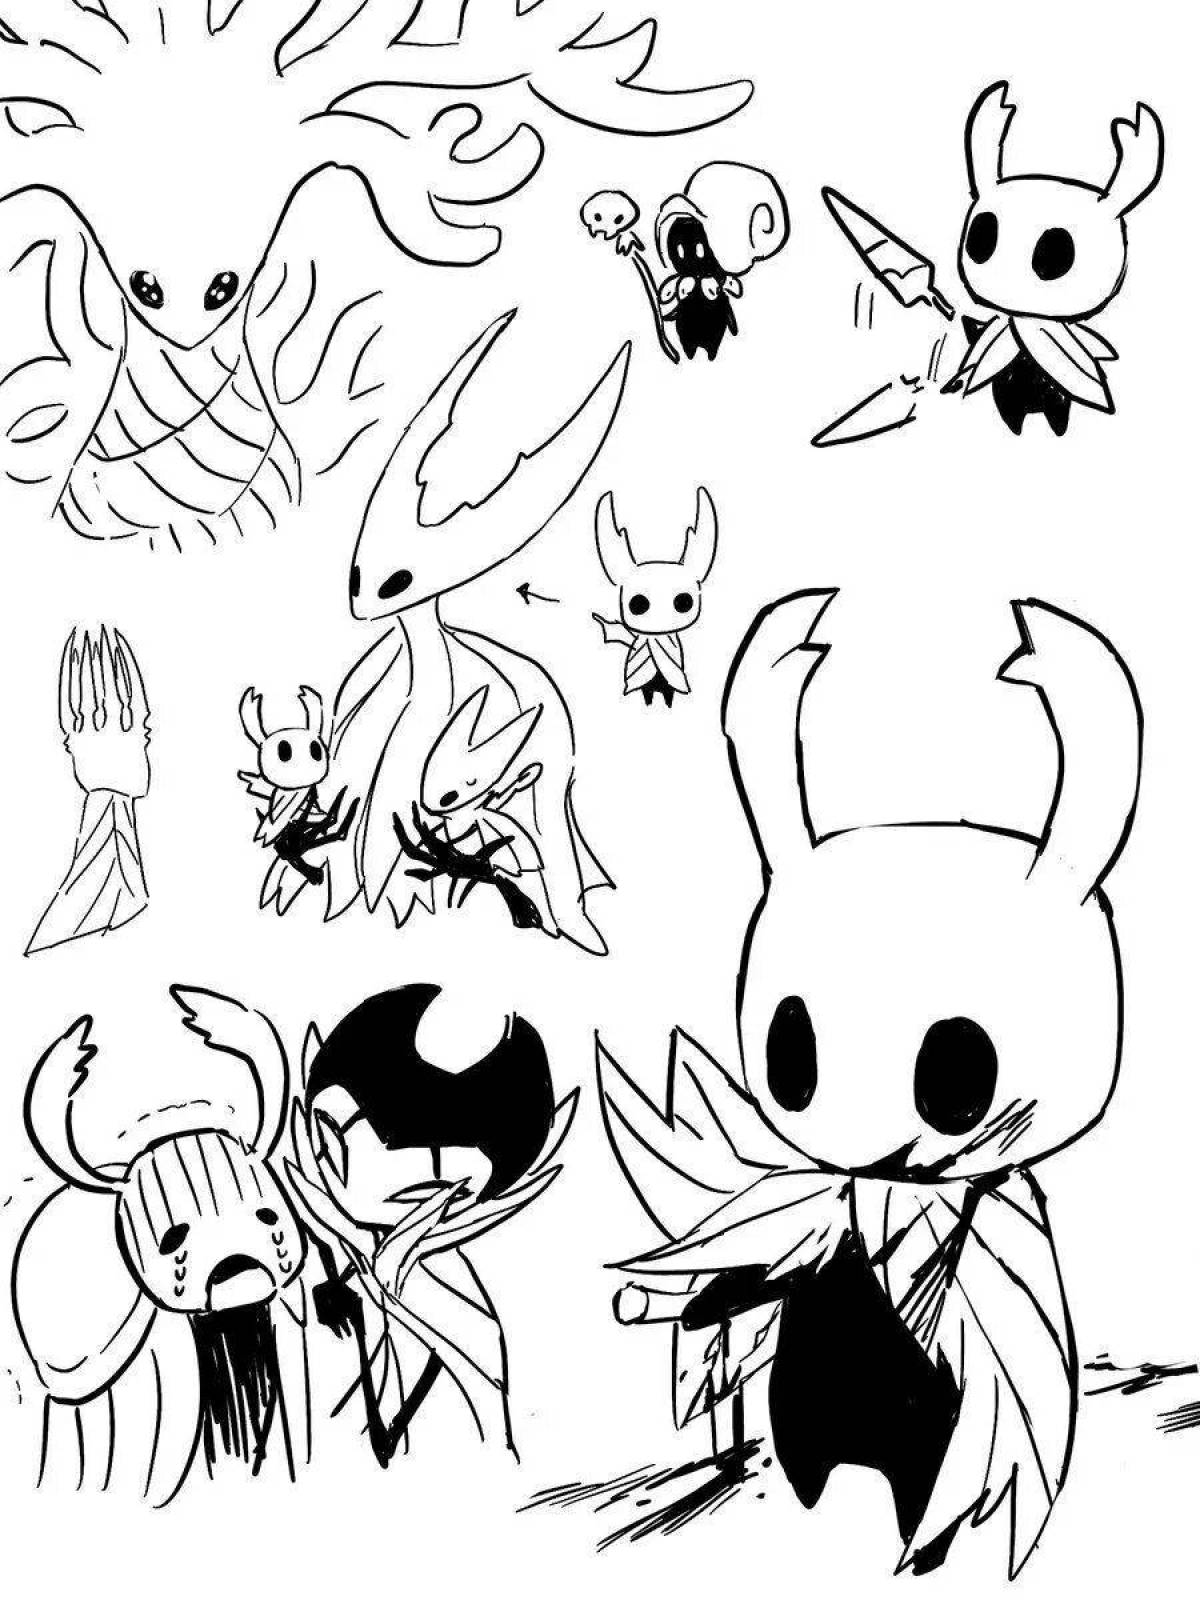 Exalted hollow knight coloring page